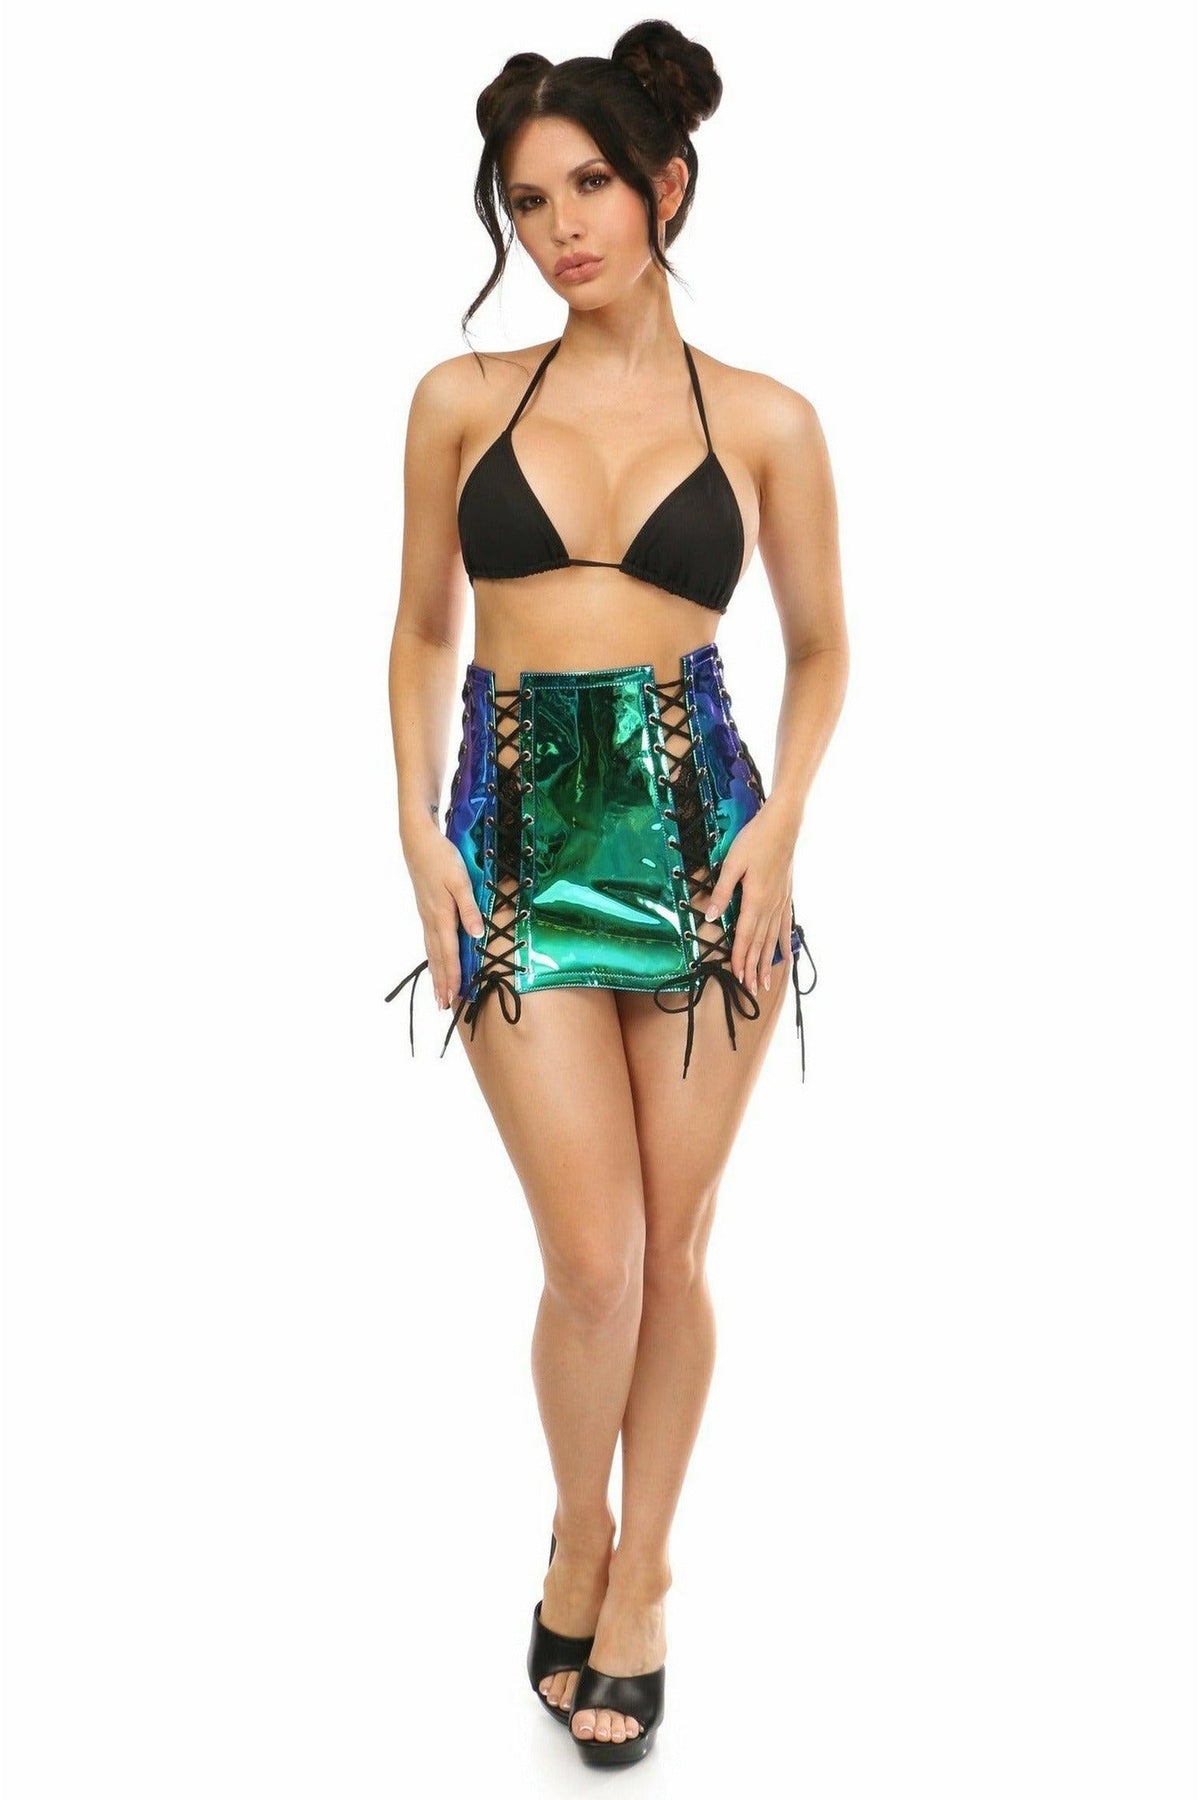 Blue/Teal Holo Lace-Up Skirt-Daisy Corsets